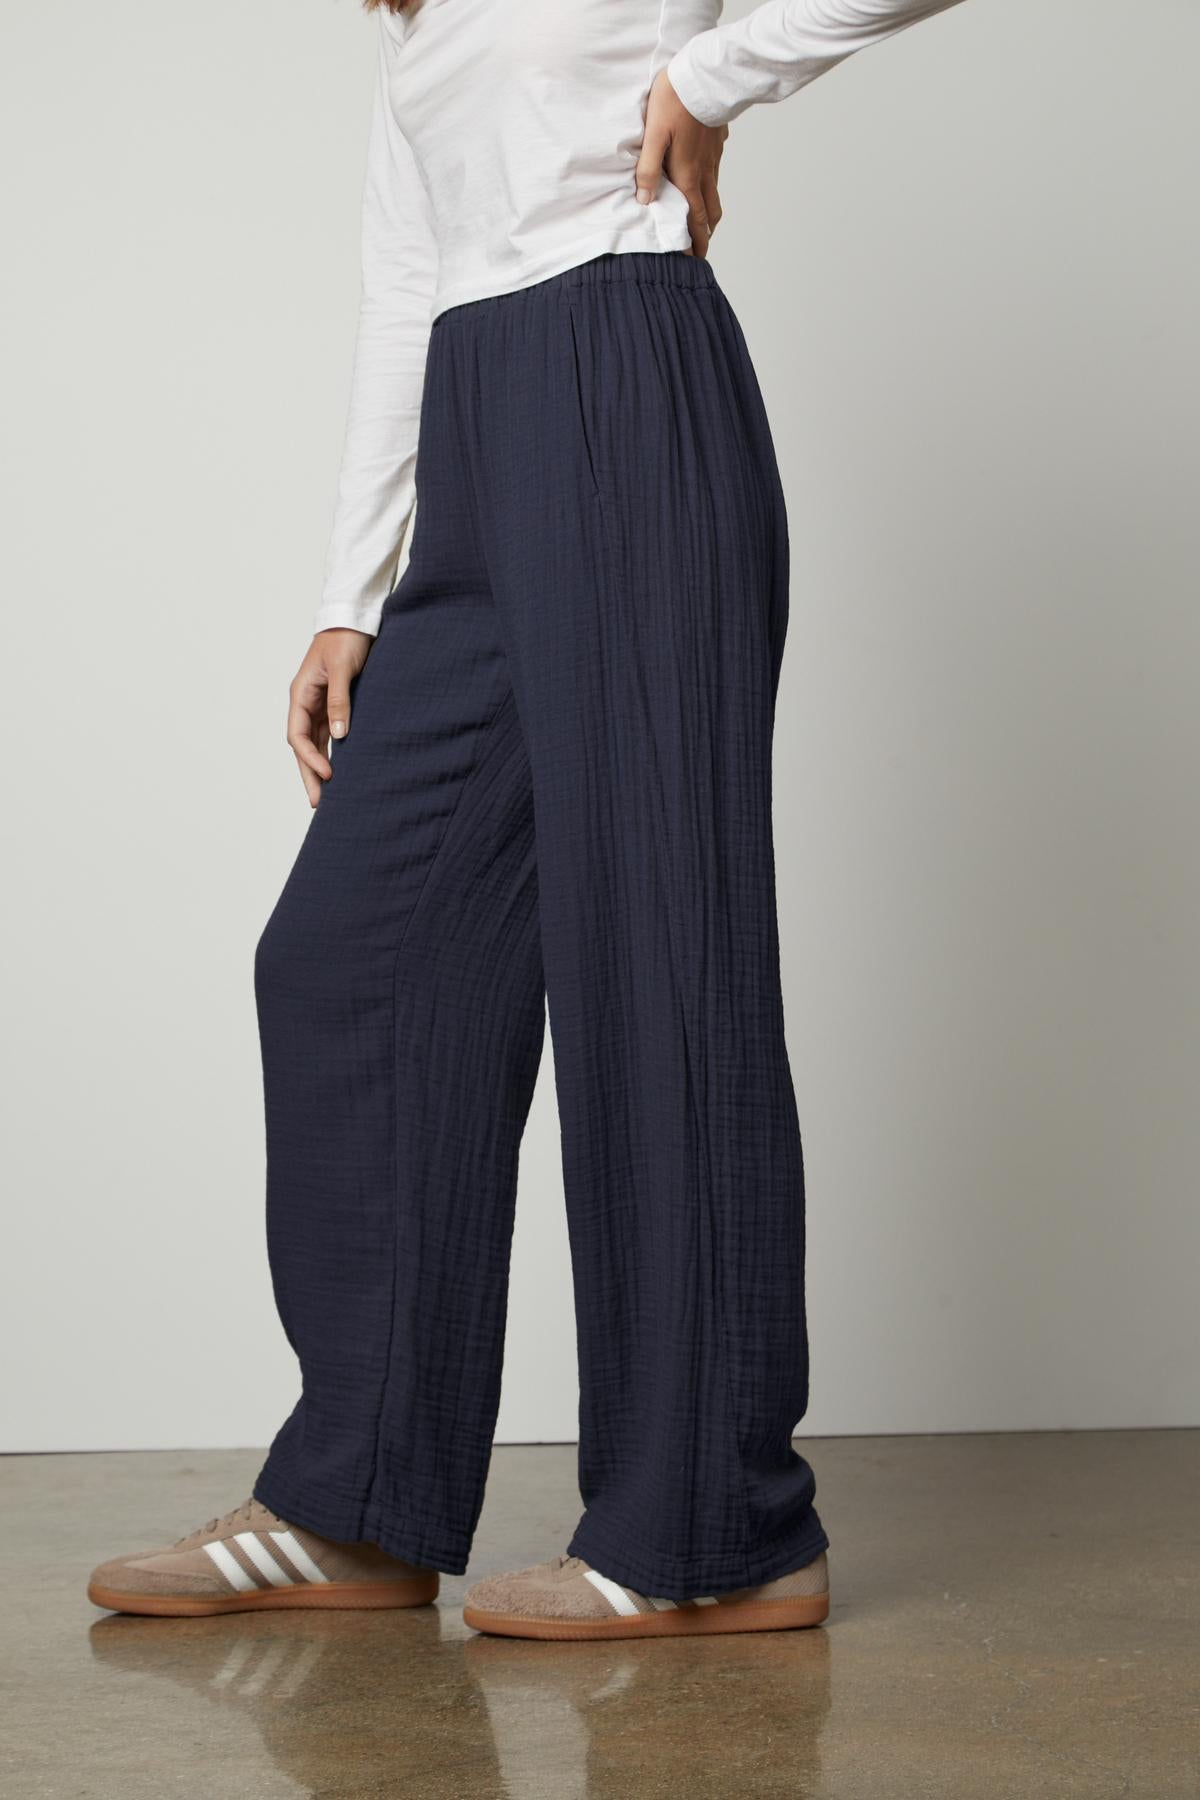   A woman wearing the Velvet by Graham & Spencer Jerry Cotton Gauze Pant with an elastic waistband and a white t-shirt. 